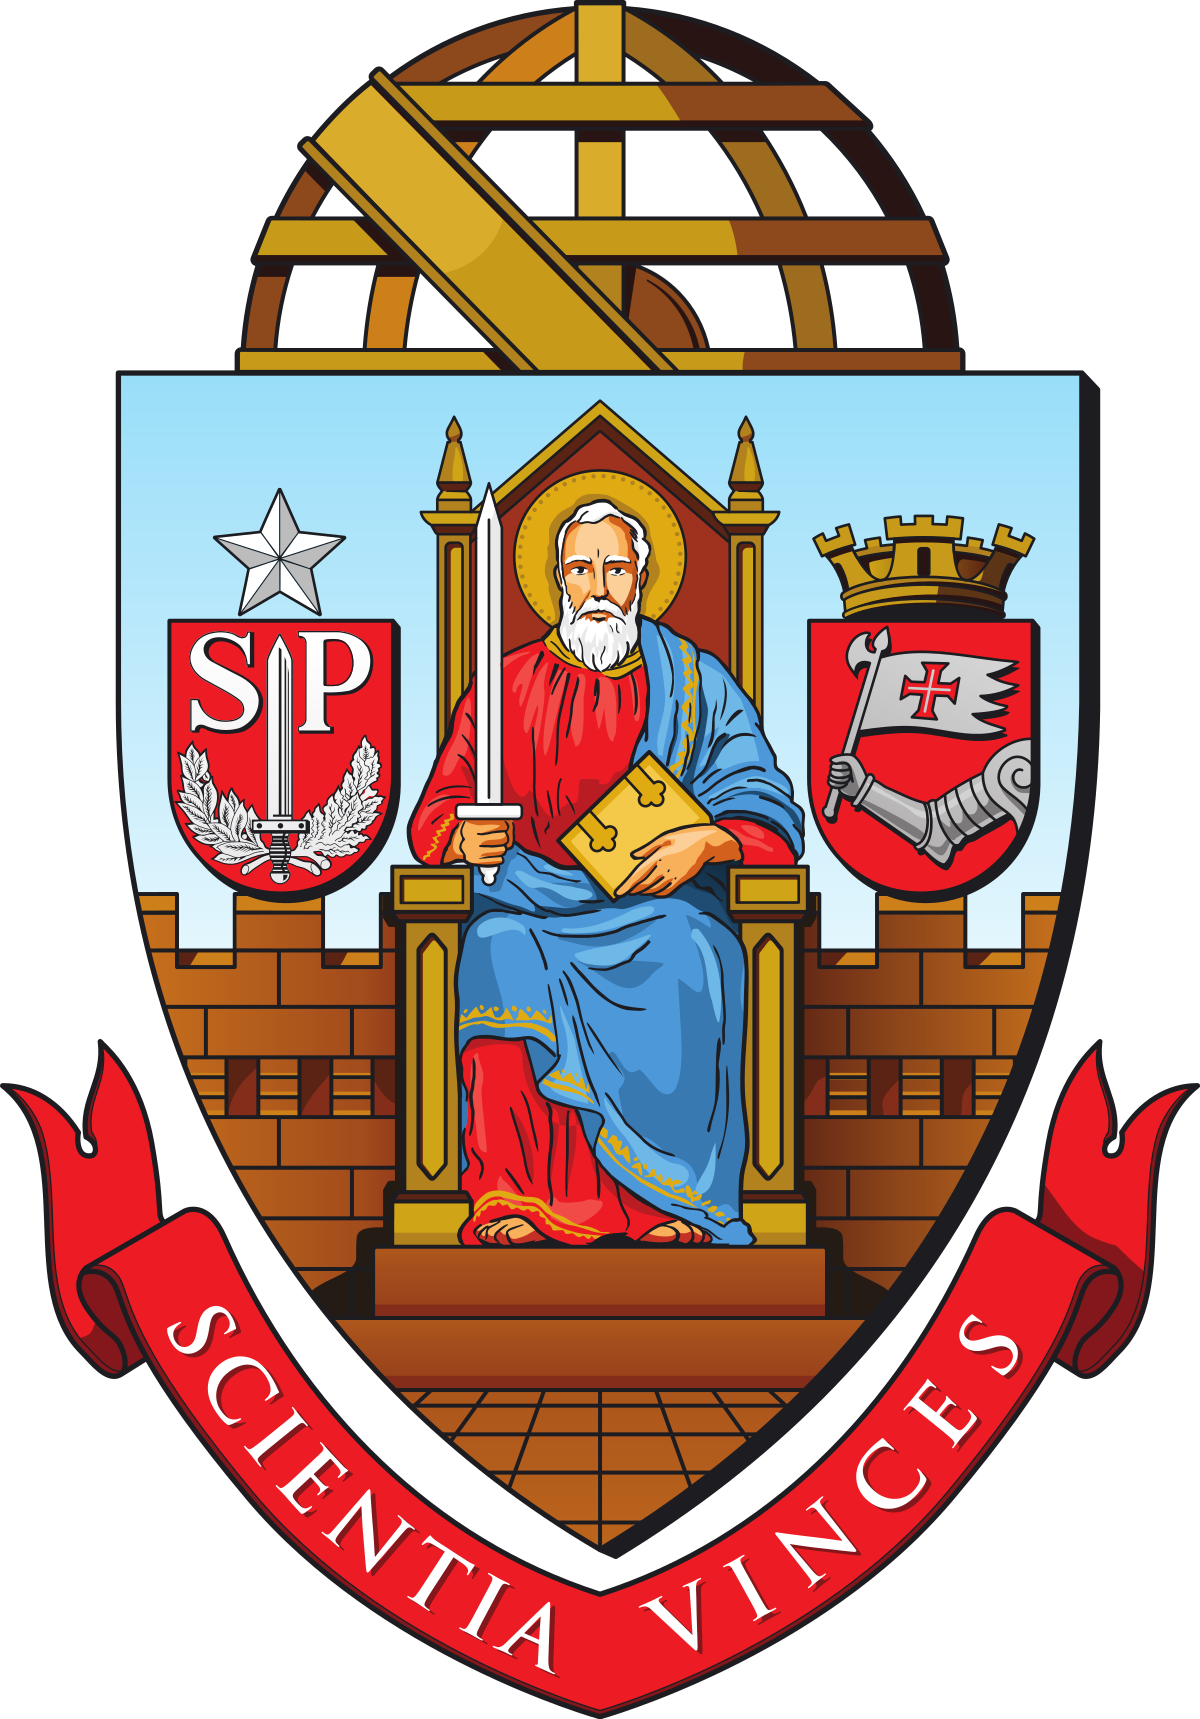 Download University Of São Paulo PNG Image with No Background - PNGkey.com